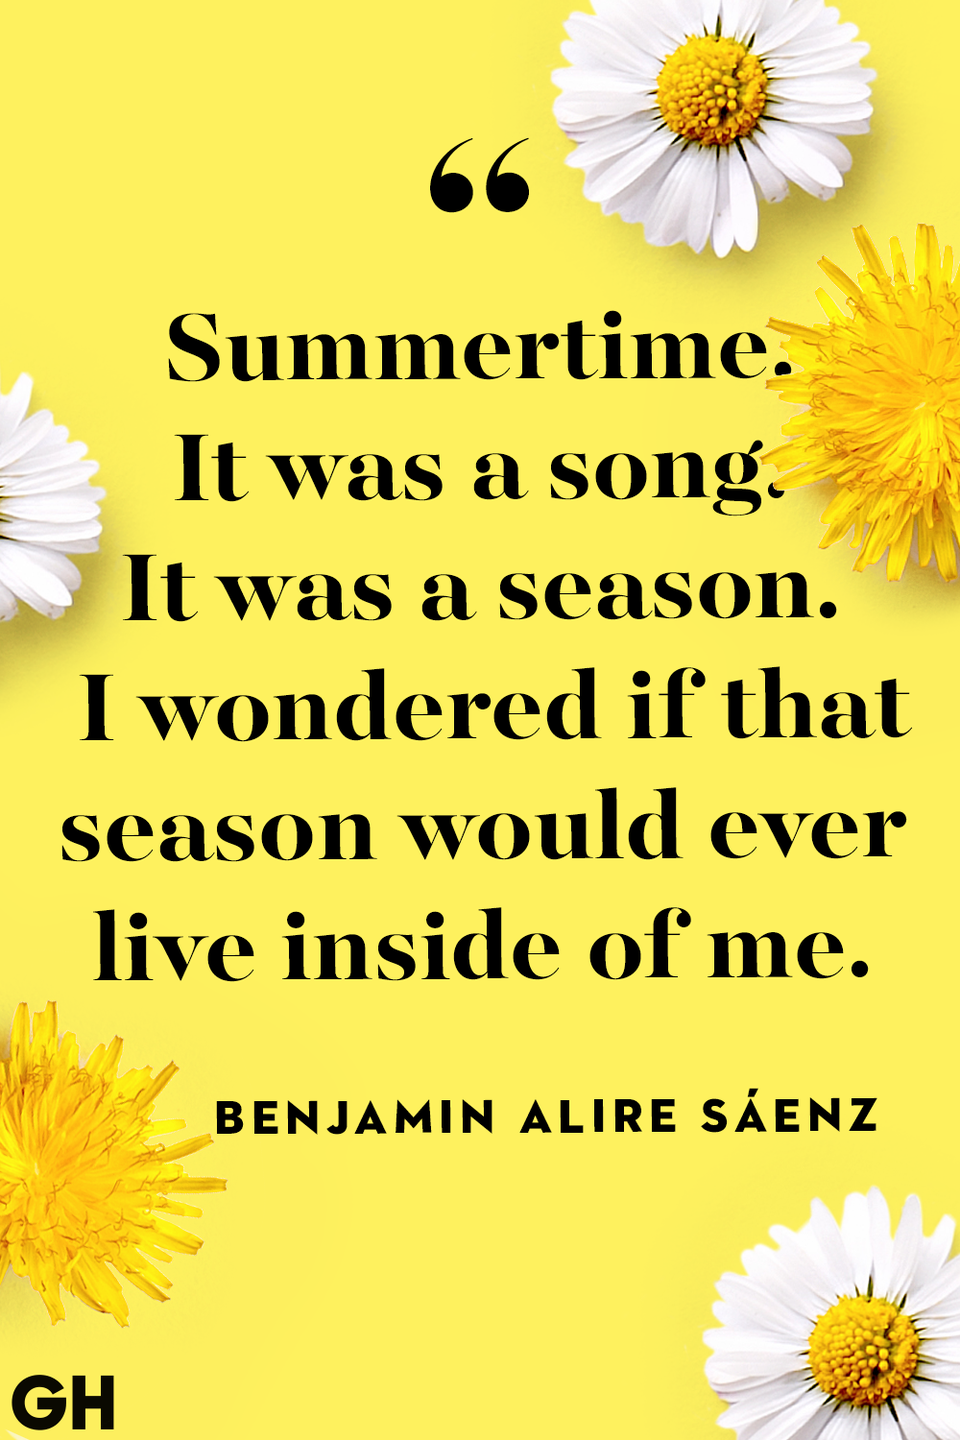 <p>Summertime. It was a song. It was a season. I wondered if that season would ever live inside of me.</p>